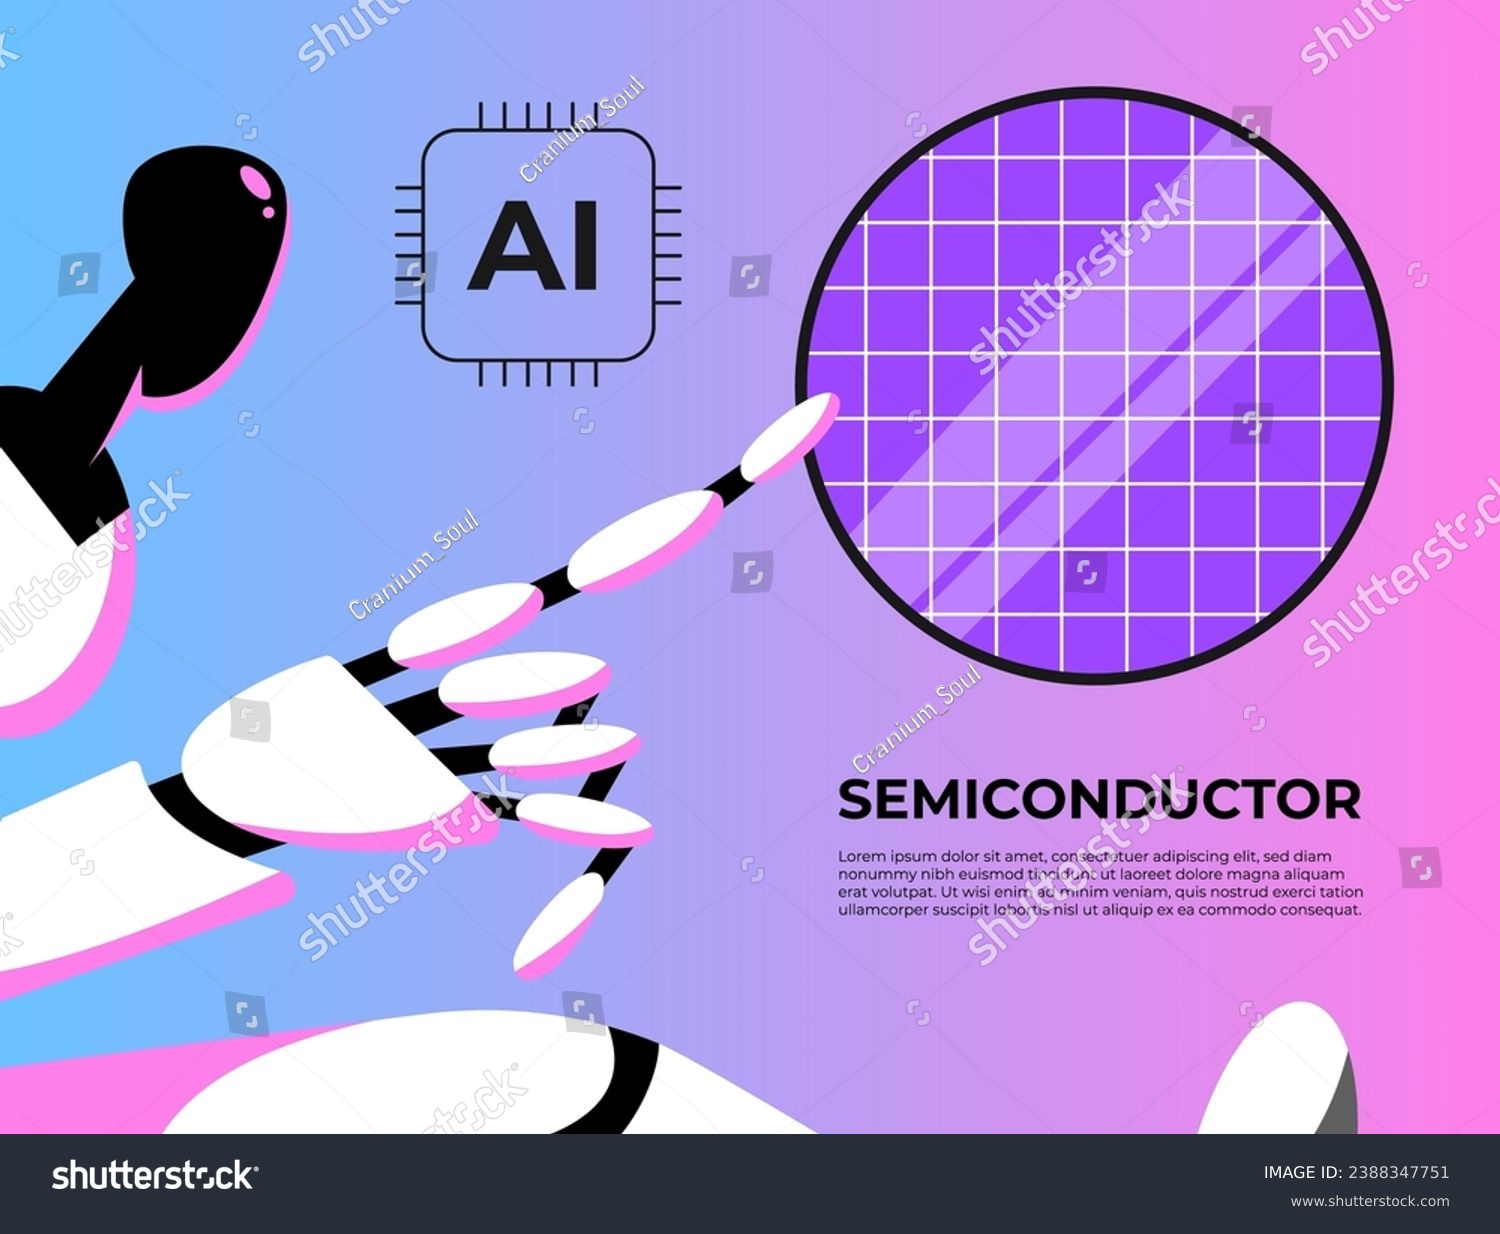 SVG of Robot working in the semiconductor industry. Development of chips for AI. Artificial intelligence on semiconductor elements. Flat vector illustration in cartoon style. svg